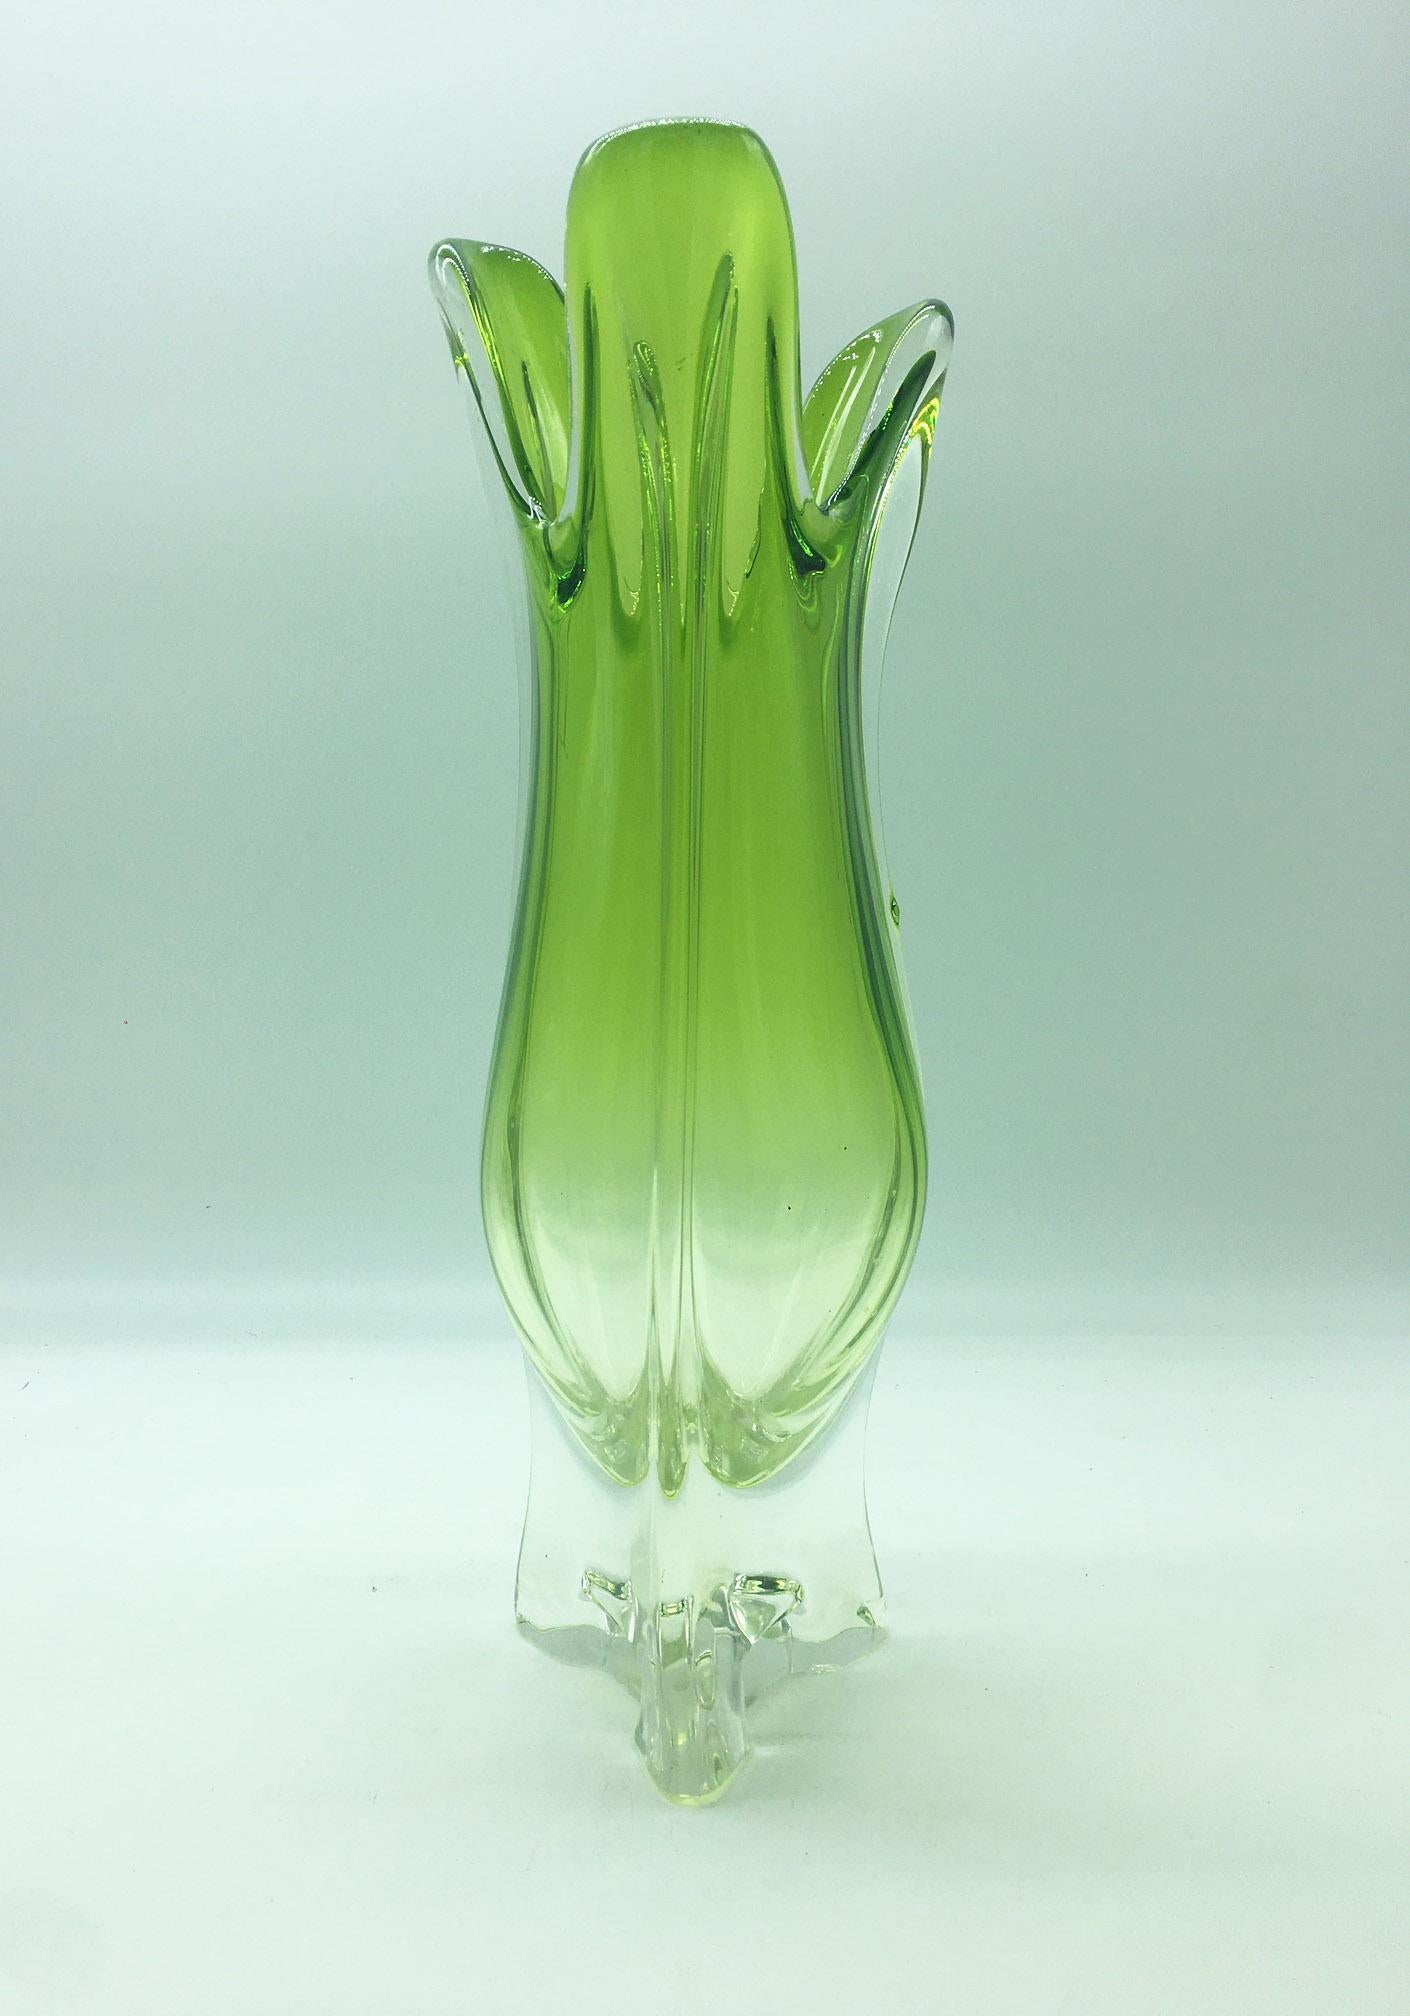 Large Murano glass vase with various shades of green and rare three-petal shape, Fratelli Toso, Italy, 1960s.